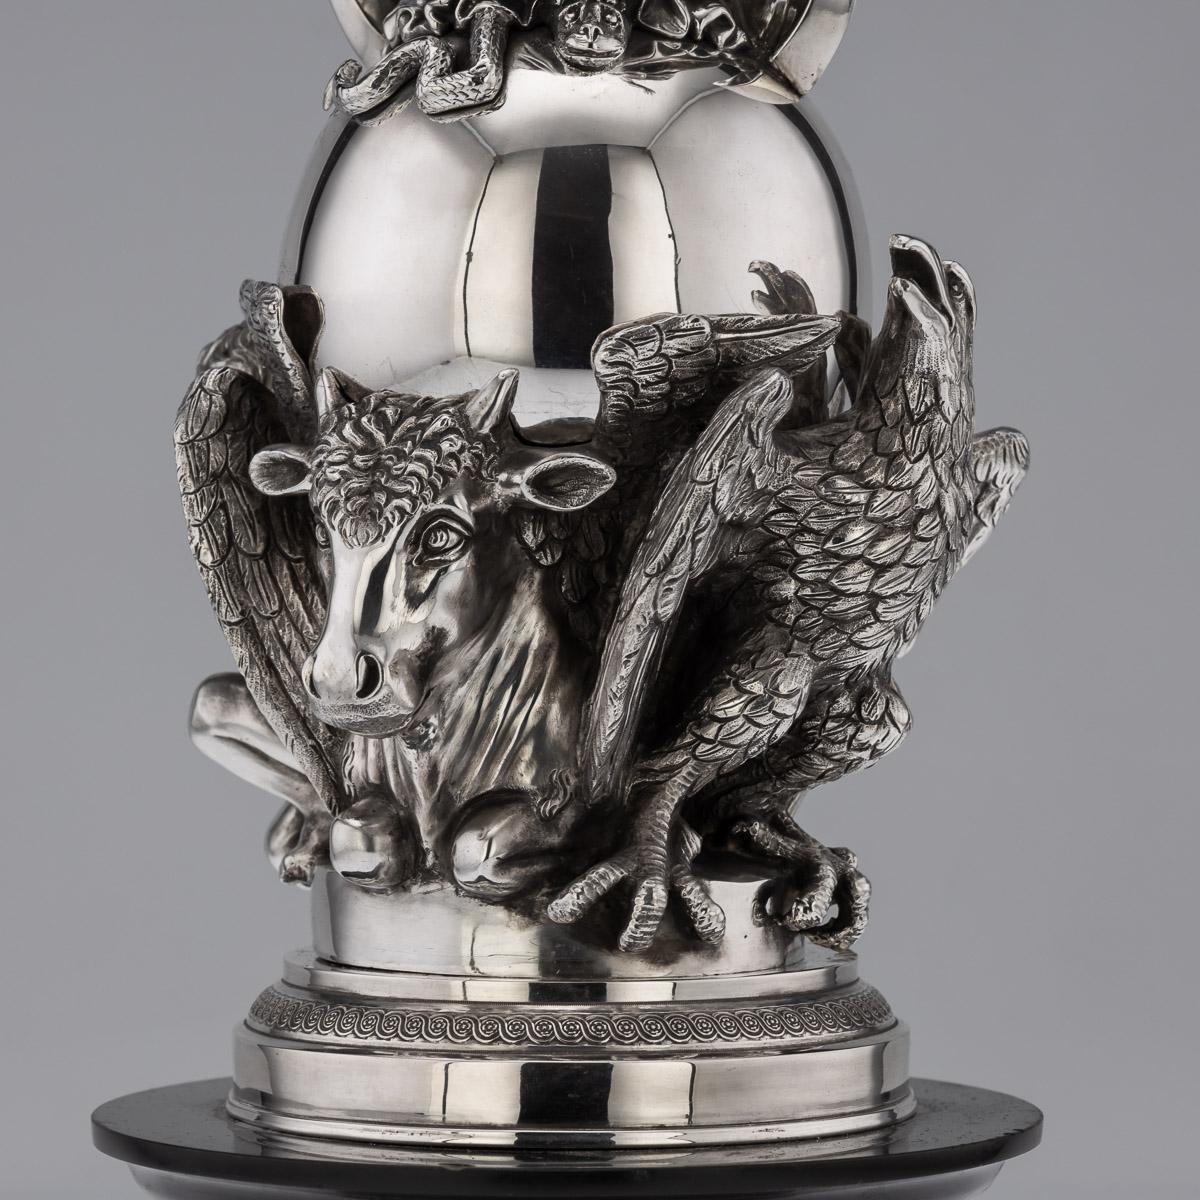 Antique 19th Century French Monumental Solid Silver Figural Centrepiece, c. 1880 For Sale 13